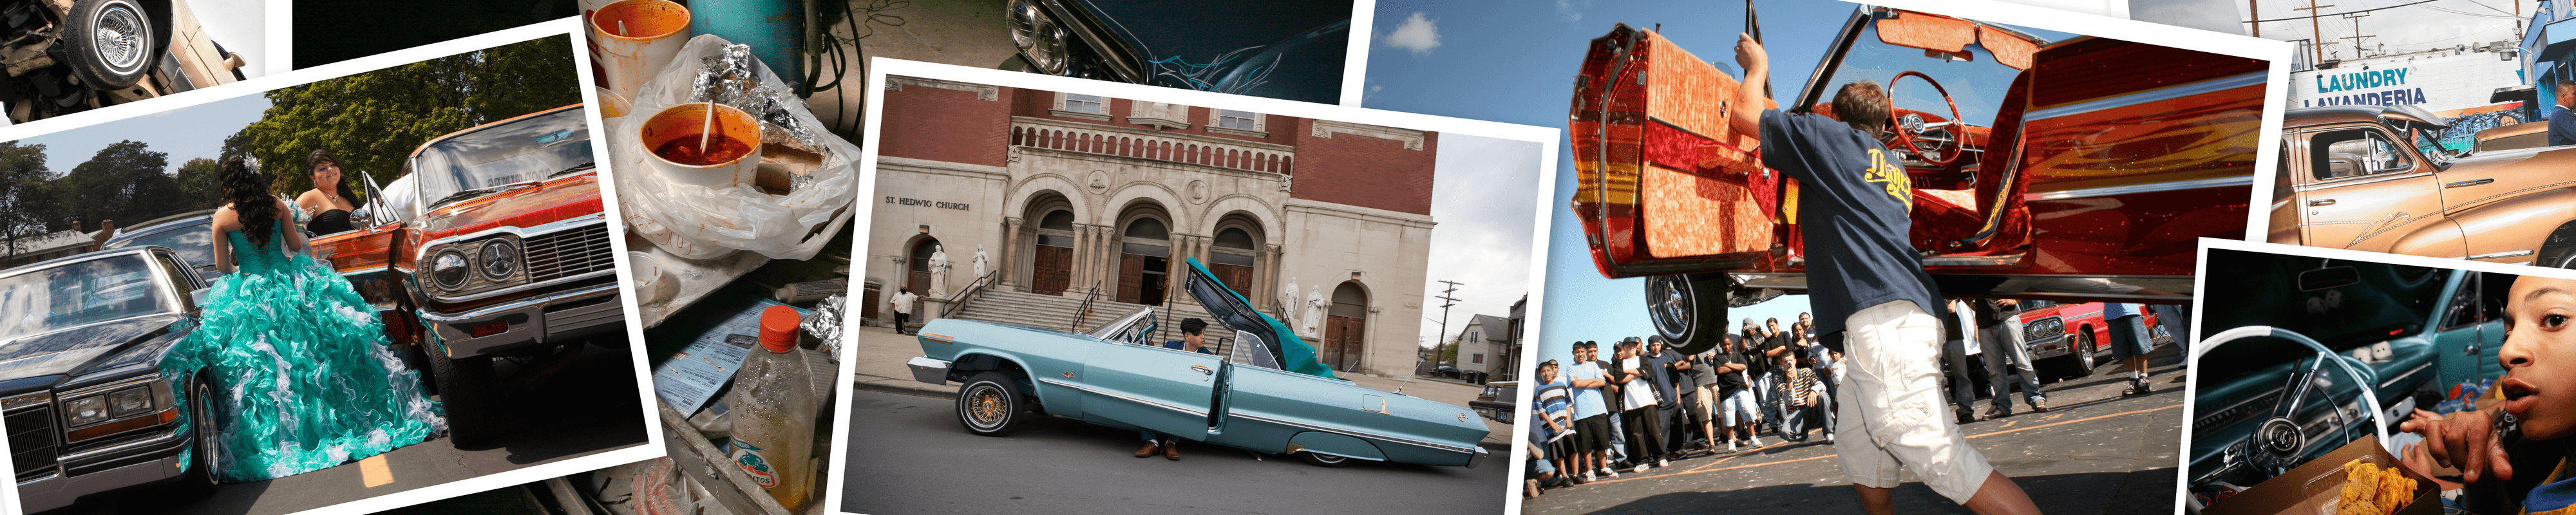 The Lowriders: From Detroit to L.A. and Back